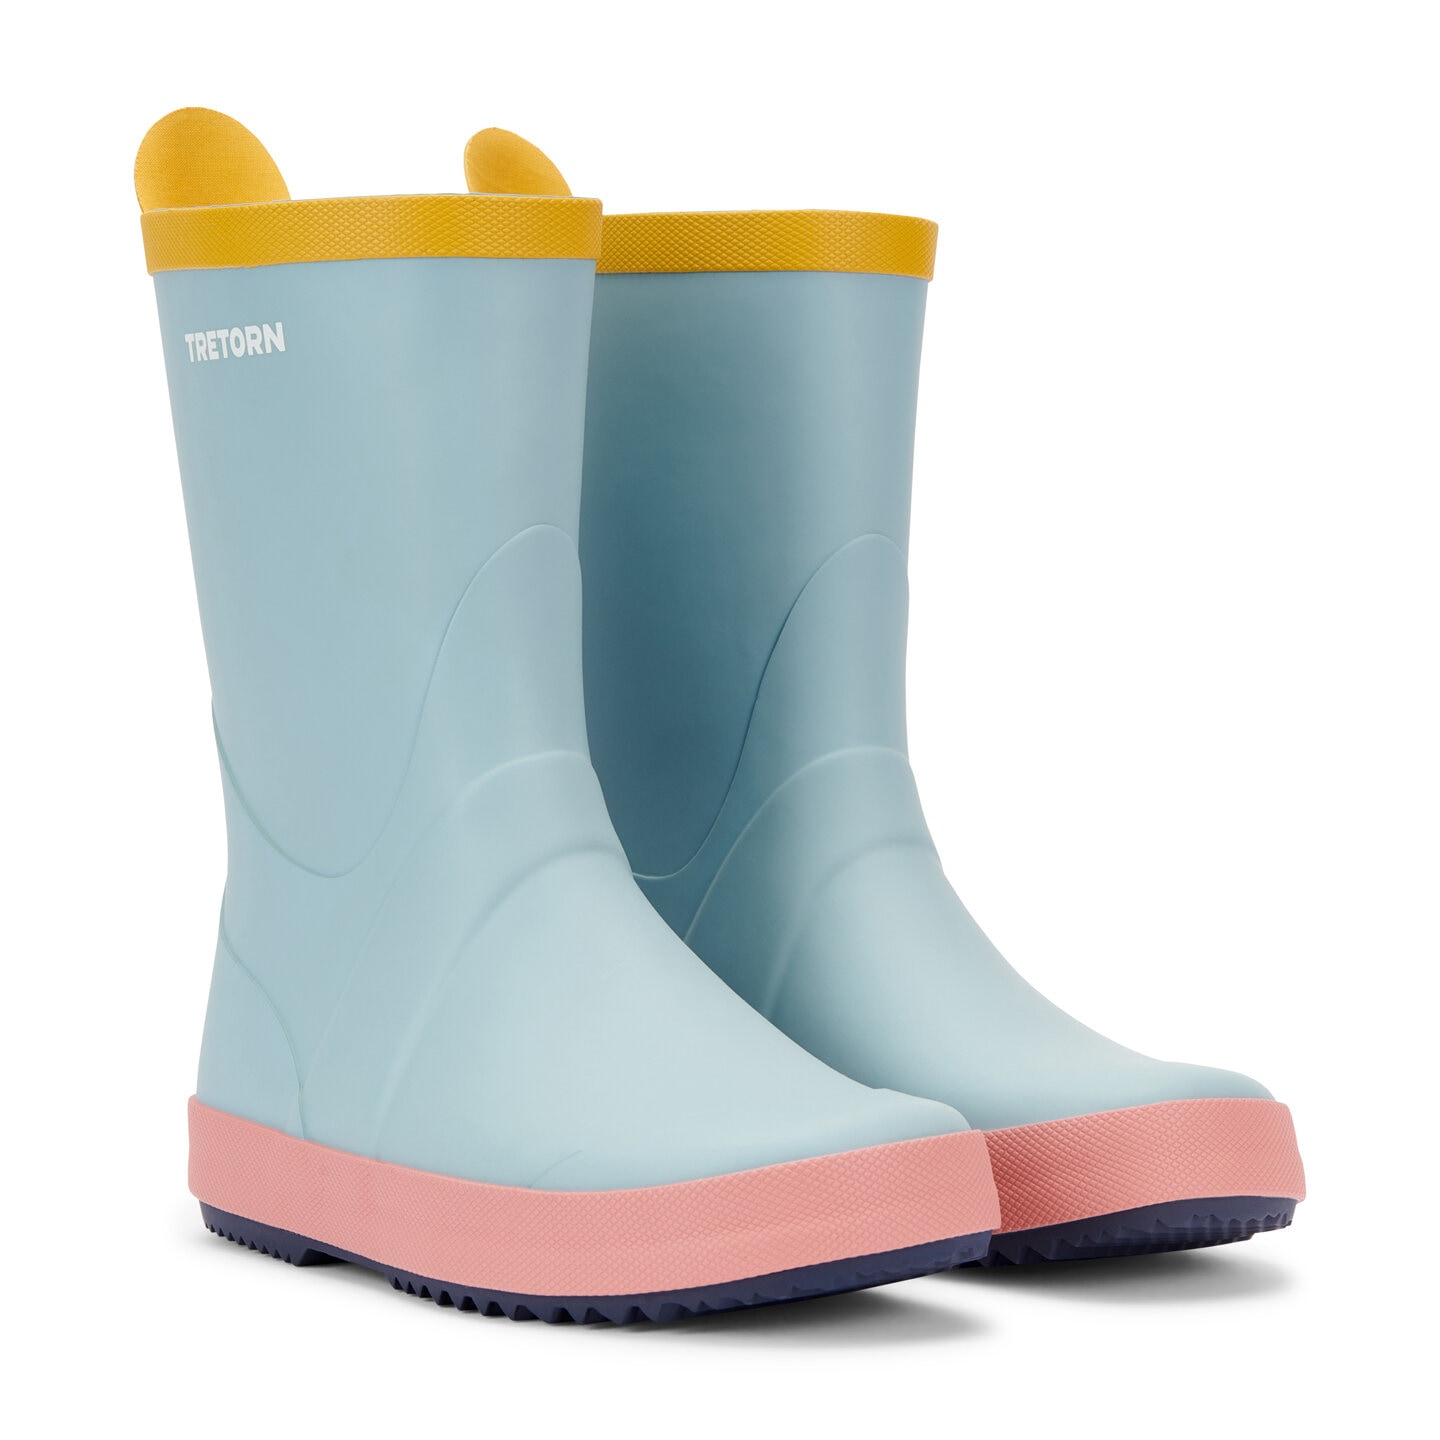 WINGS RUBBER BOOT